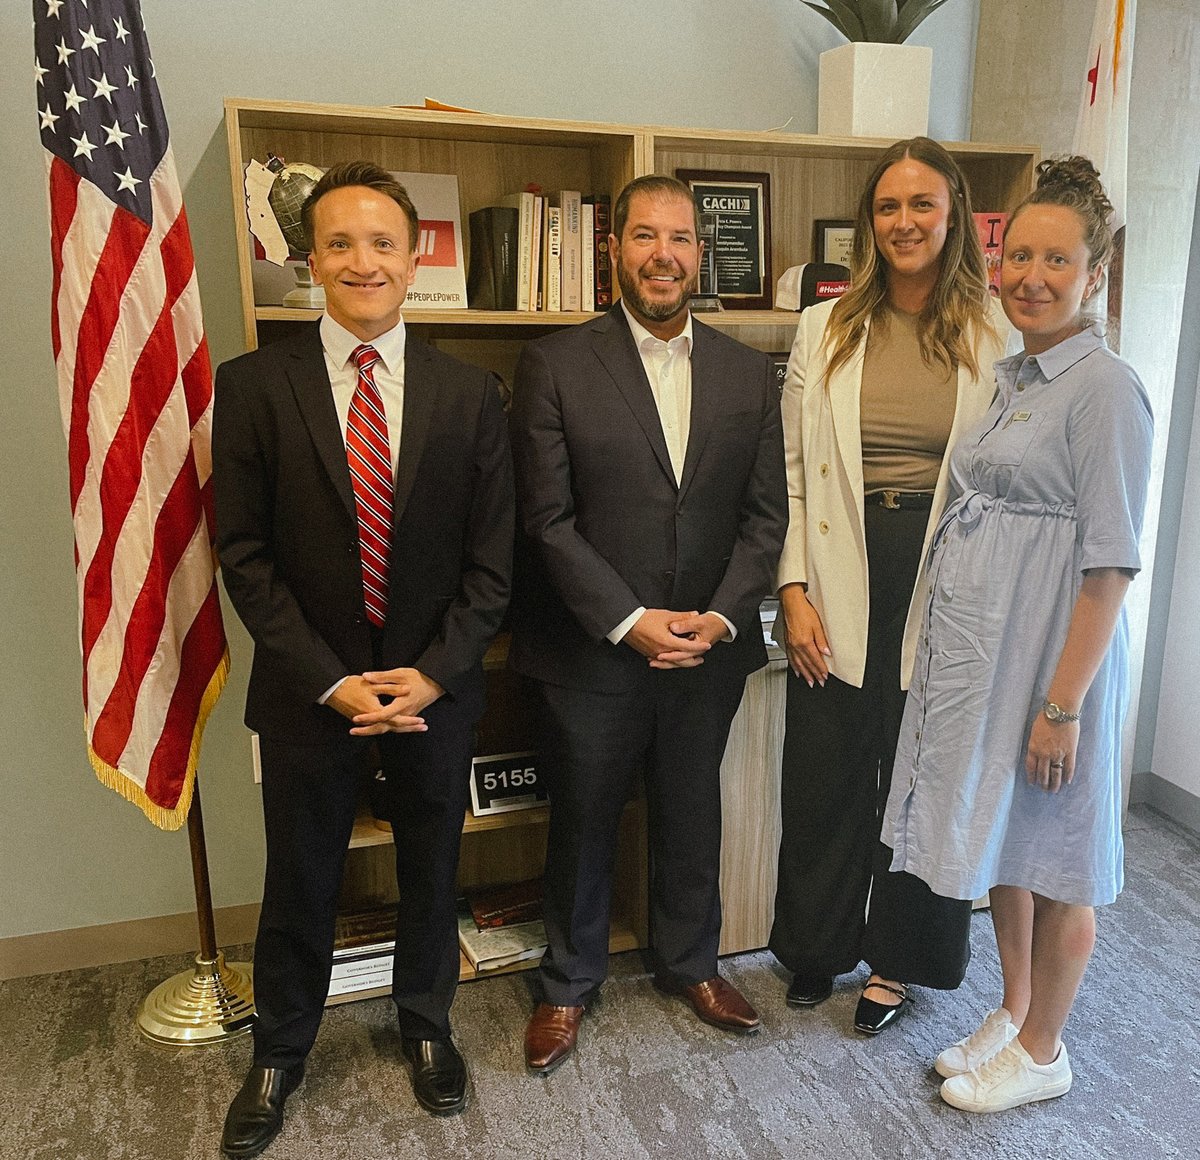 Thank you for meeting with us @Dr. Joaquin Arambula & Becky Silva with @CaFoodBanks! We truly appreciate the discussions taking place to help continue nourishing our neighbors facing hunger! #CALeg #CABudget #CapitolActionDay